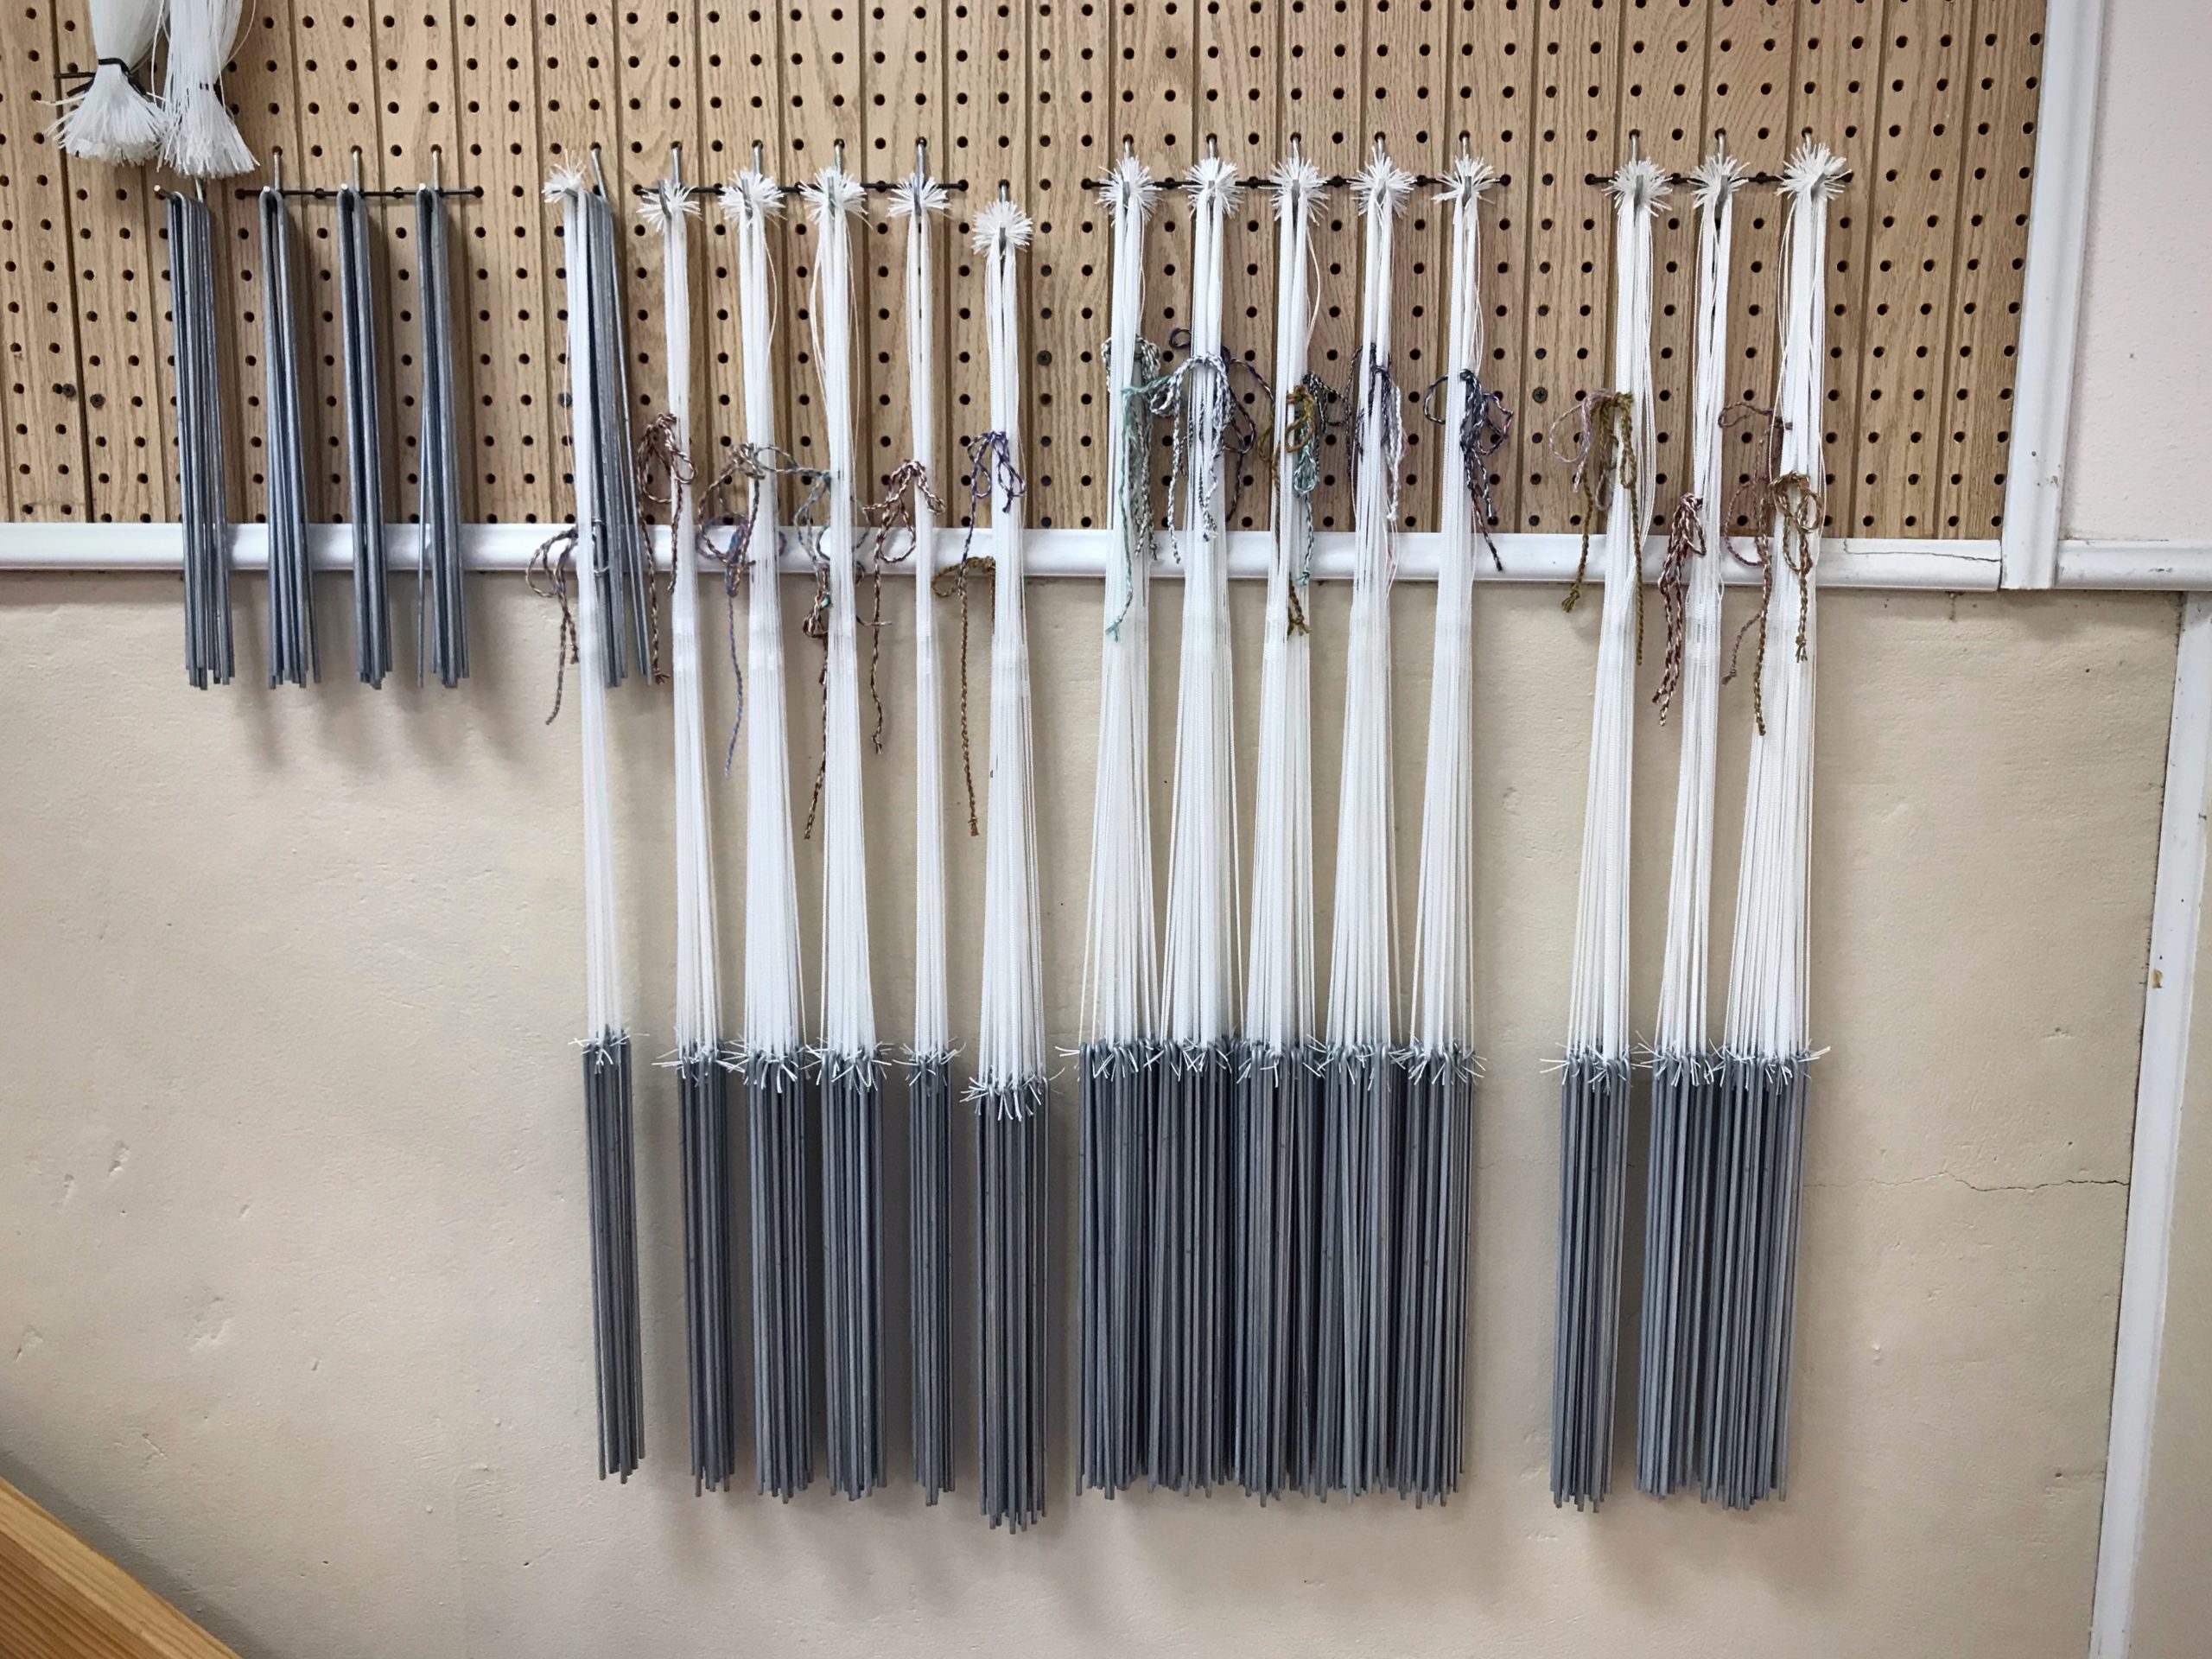 Long heddles and lingos for the drawloom.